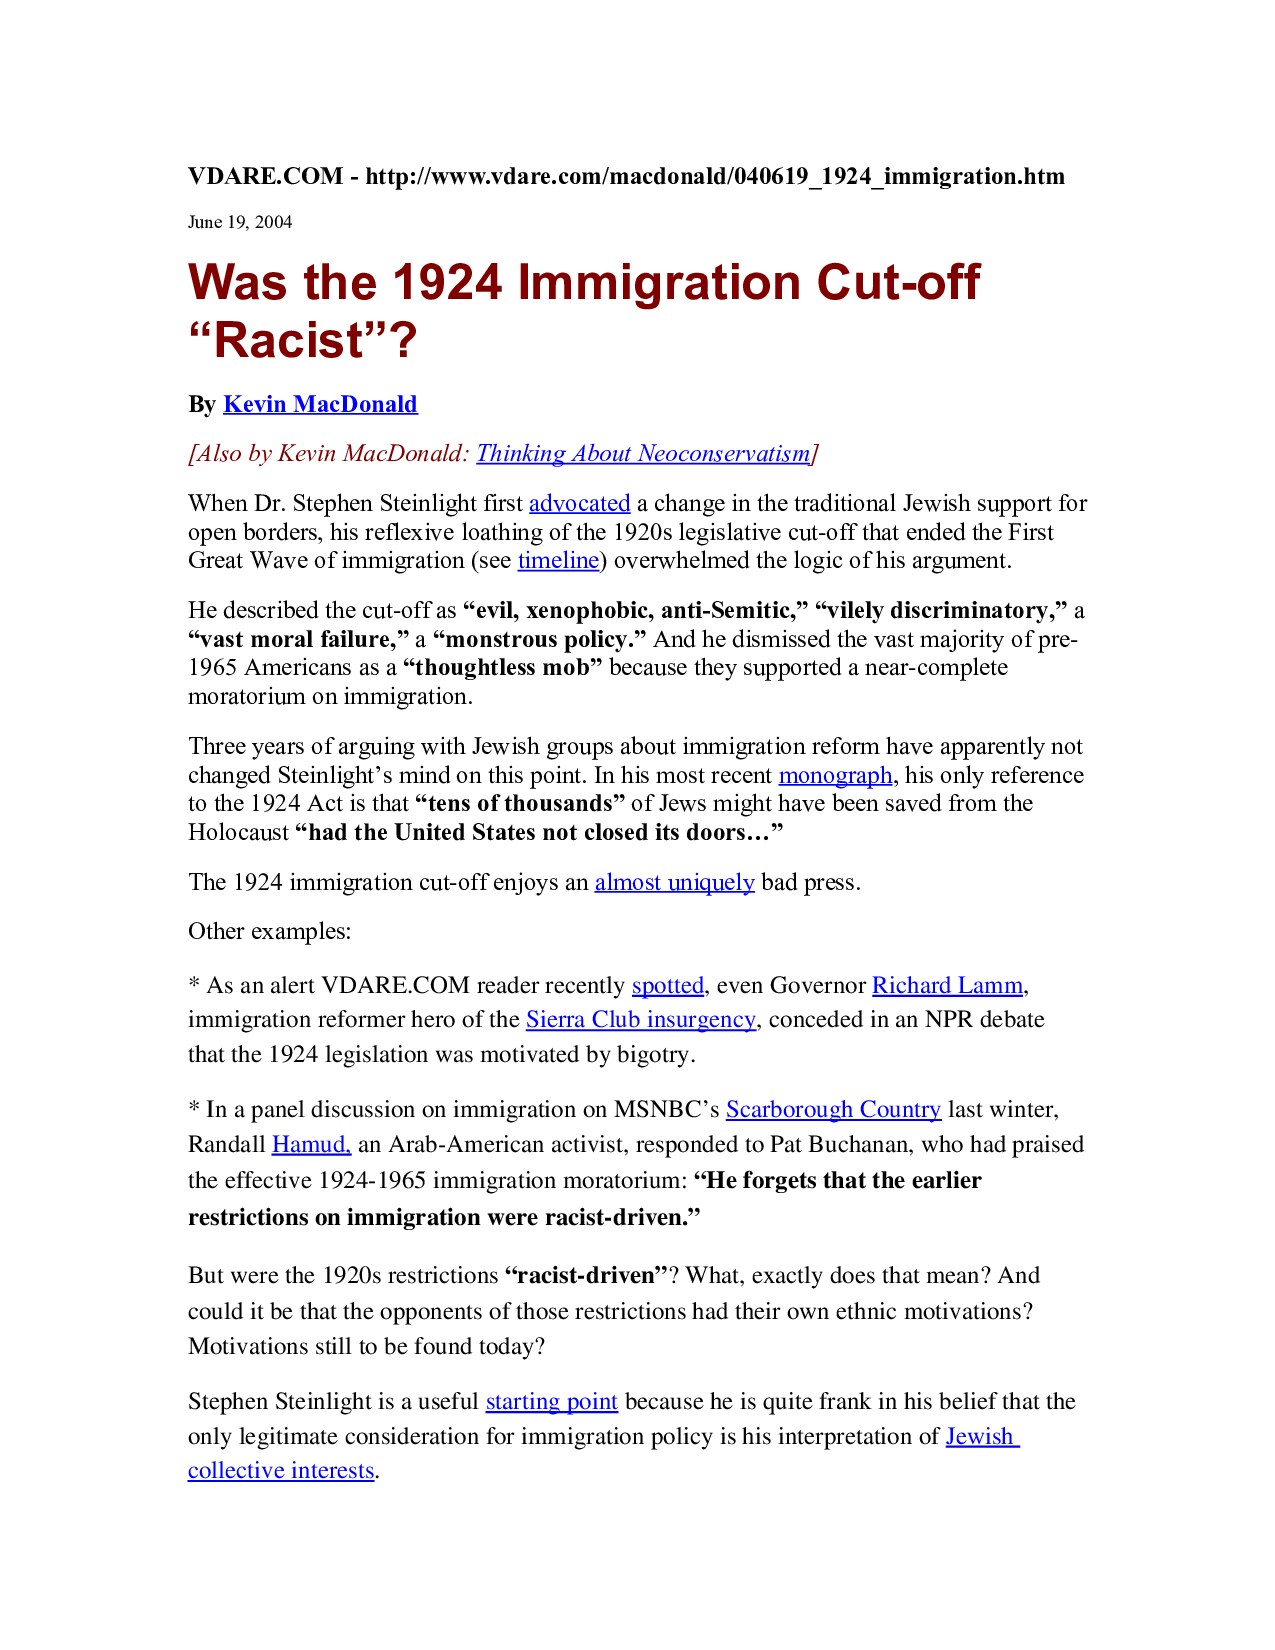 MacDonald, Kevin; Was The 1924 Inmmigration Cut-off ''Racist''